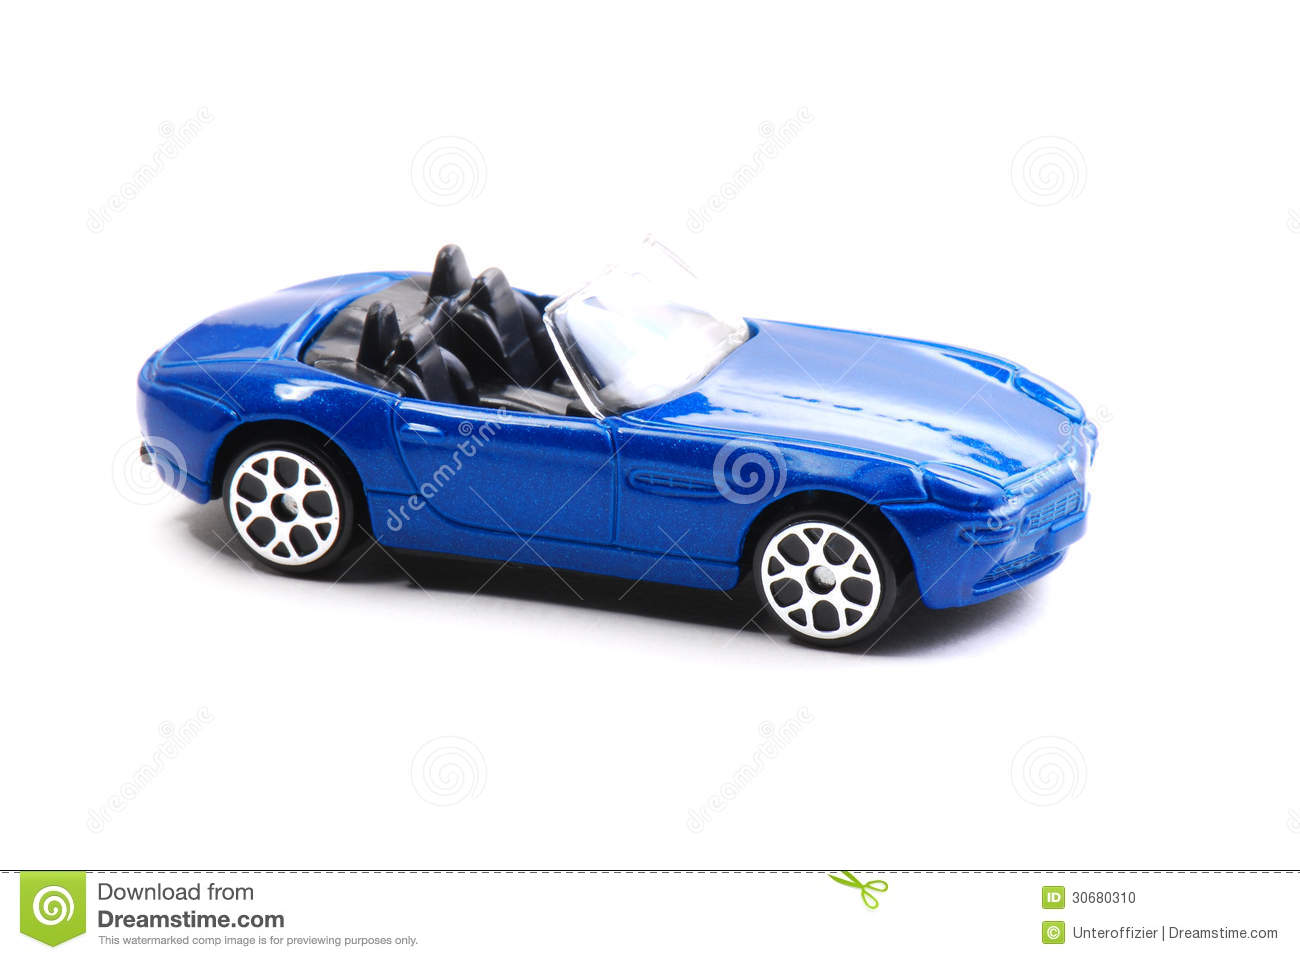 Blue Painted Toy Convertible Car Against A White Backdrop